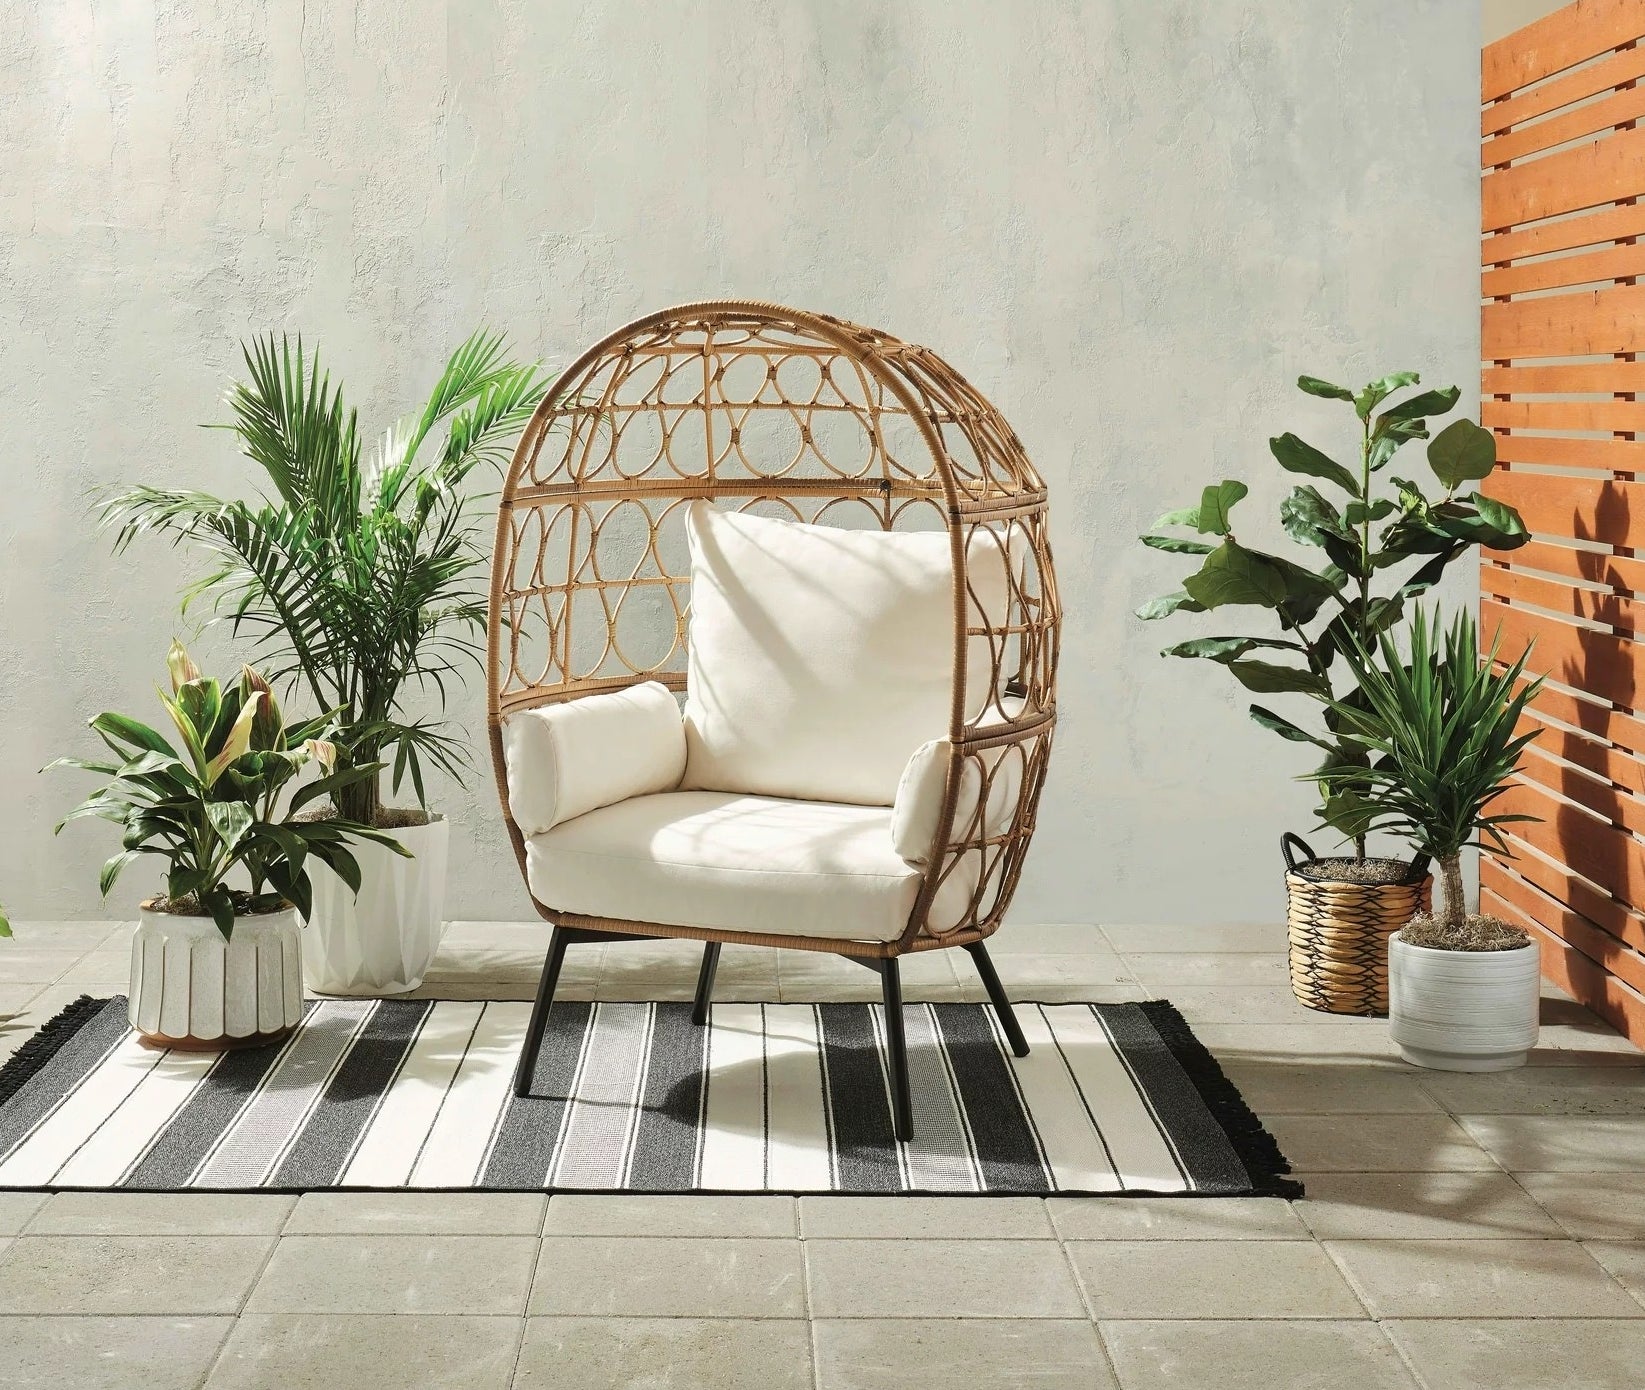 brown wicker egg chair with white cushions in a cute outdoor area